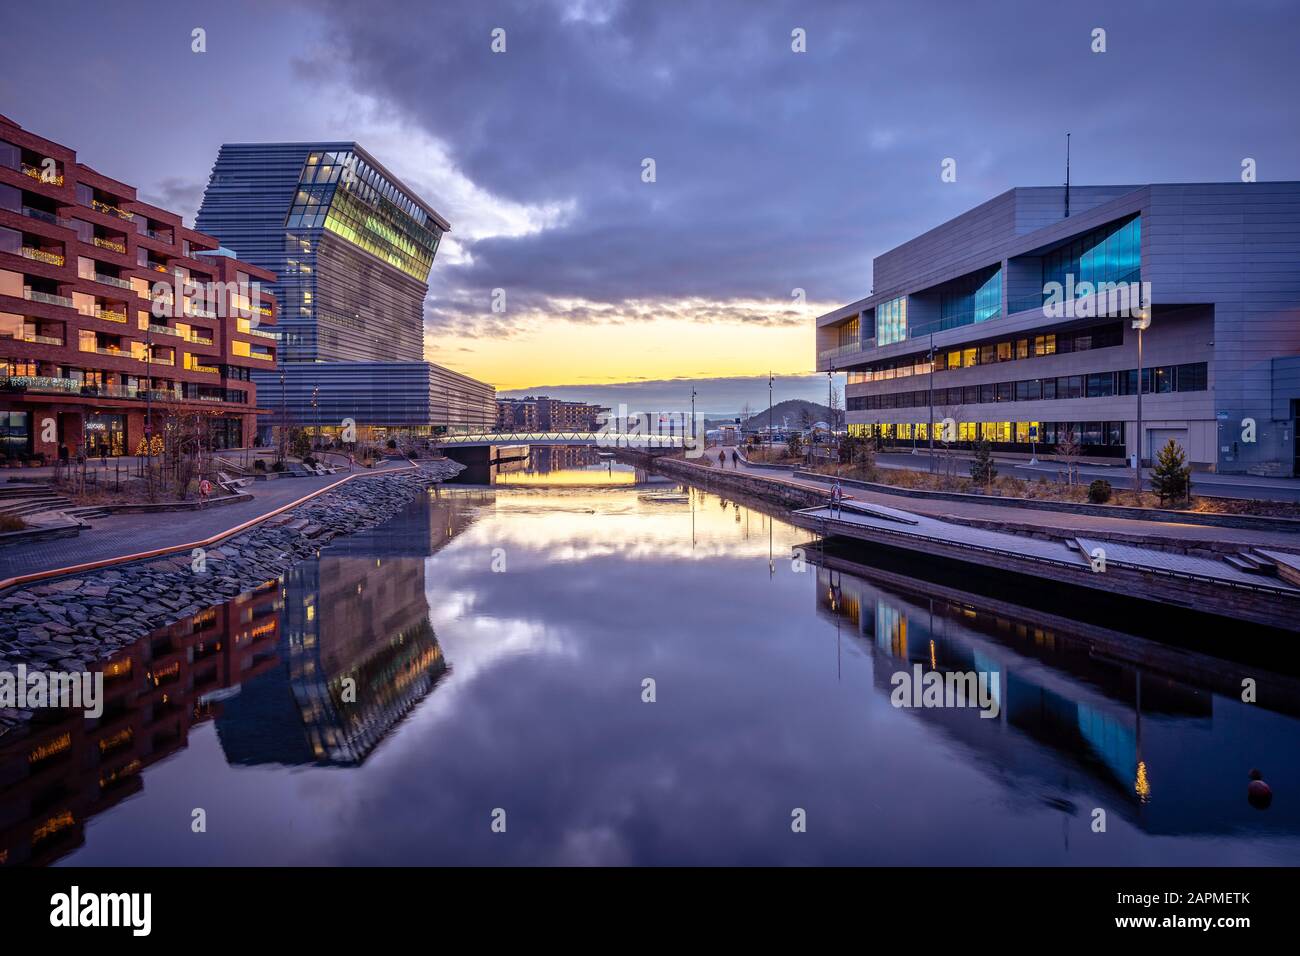 Oslo, Norway - Lambda art museum and the rear of the Opera House buildings at sunset Stock Photo